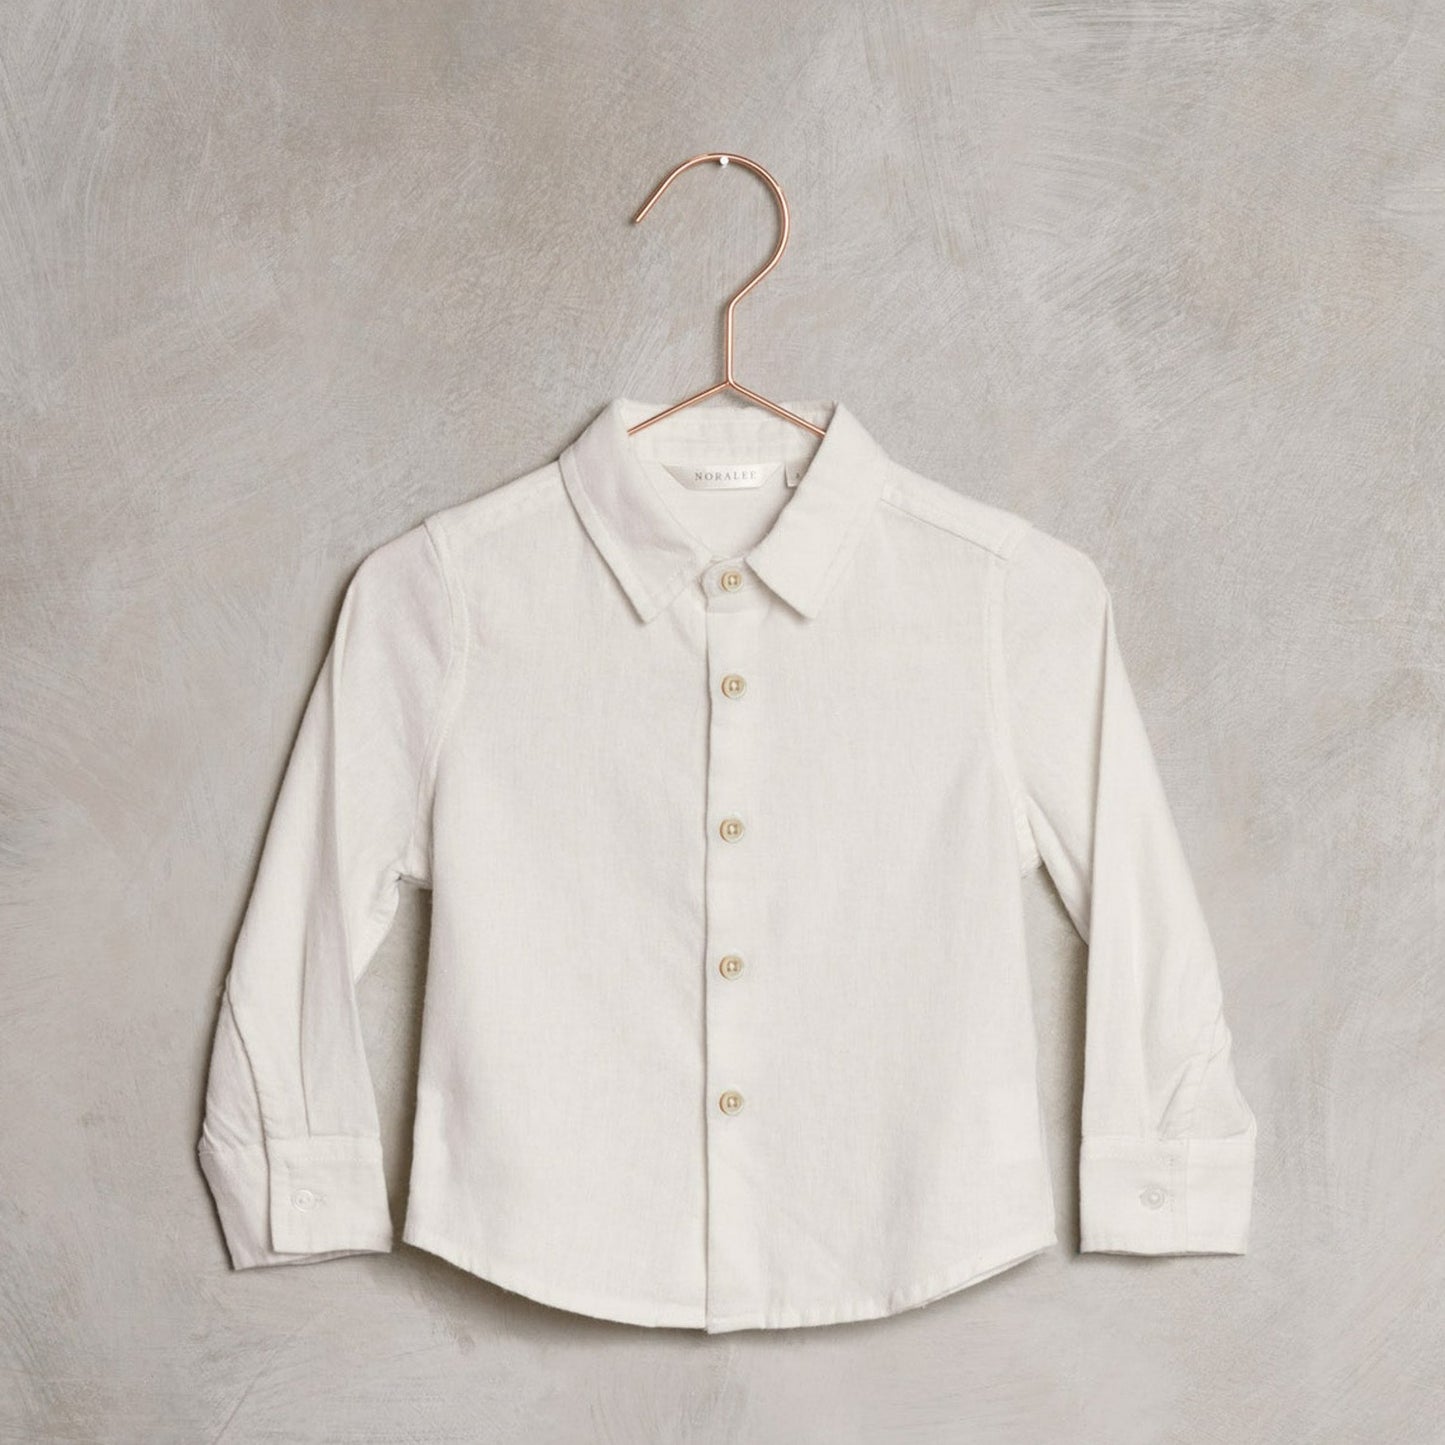 Noralee L/S Button Up Harrison Dress Shirt _White NL043-P001